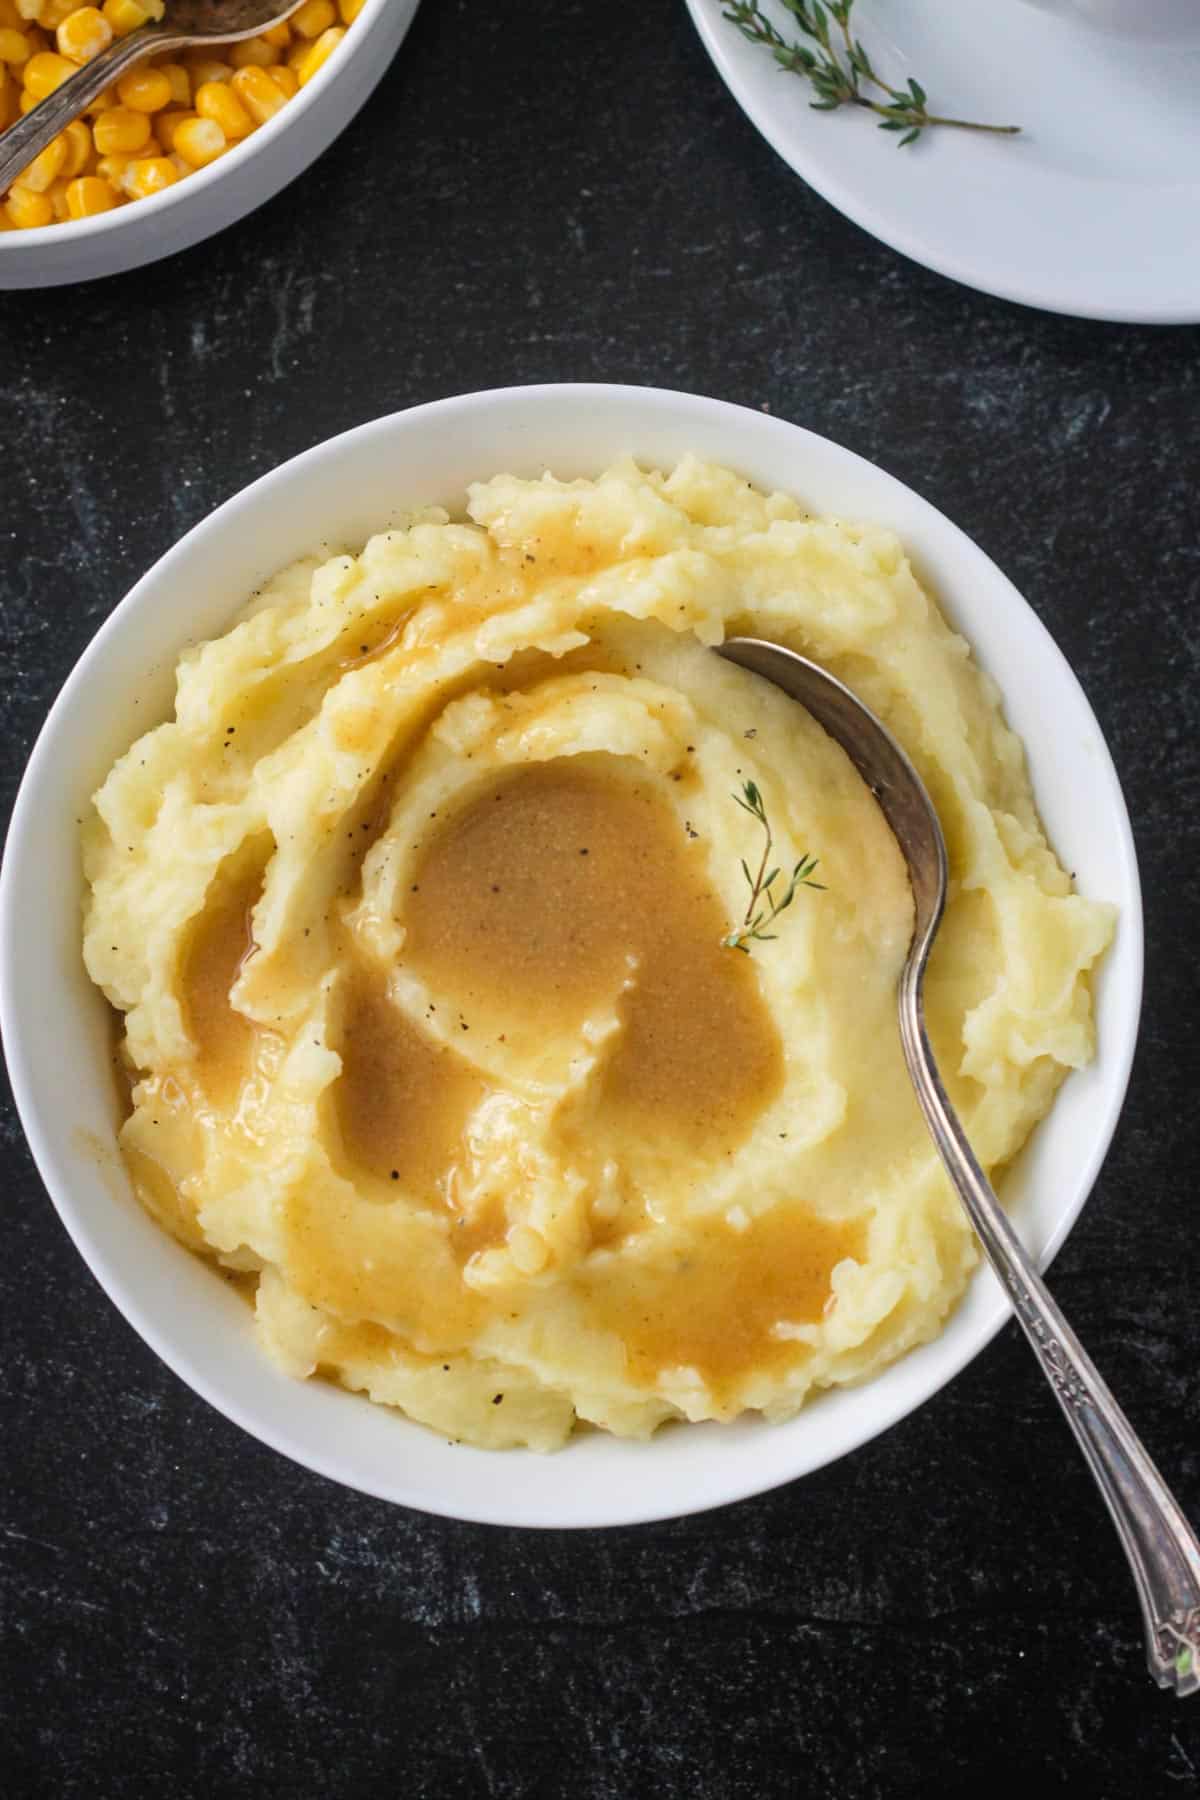 Bowl of mashed potatoes topped with vegan gravy.